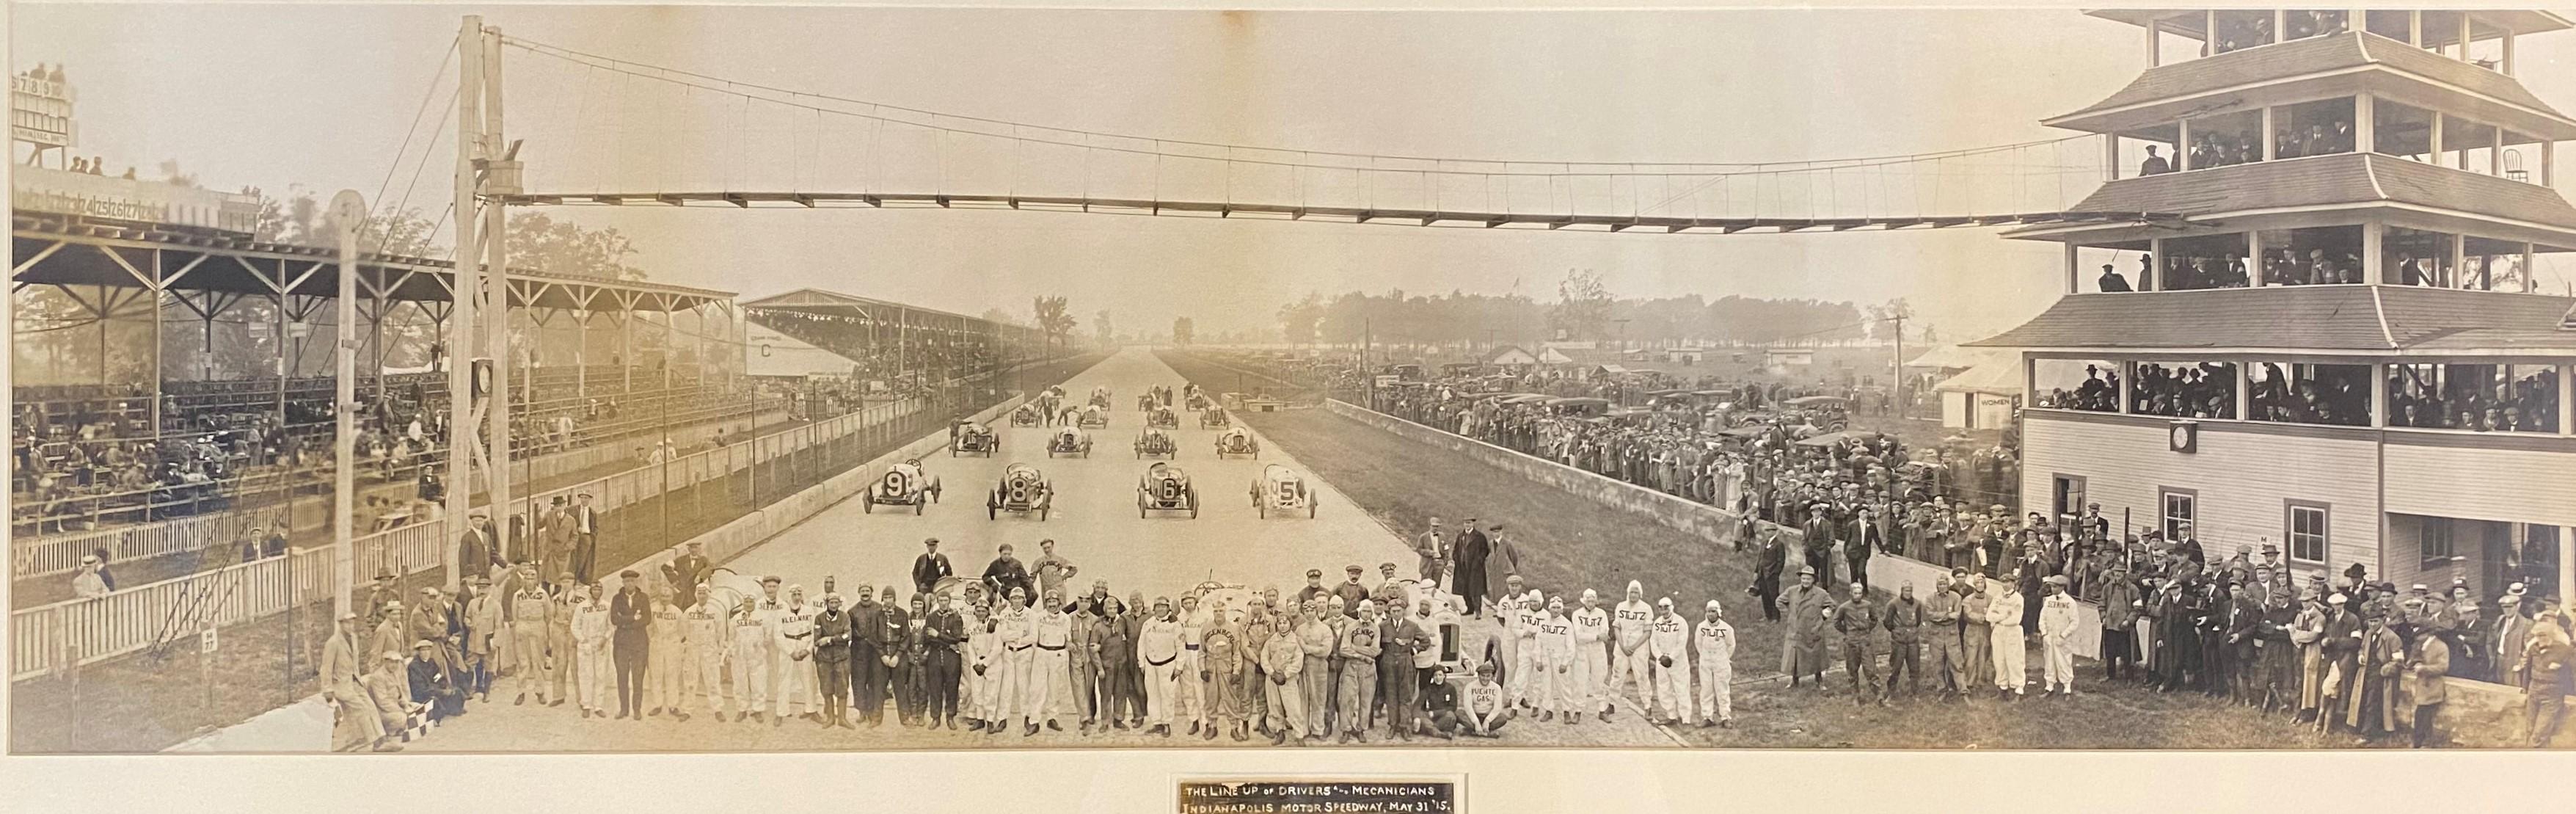 A wonderful panoramic sepia photograph of the Indy 500 racing drivers, cars, & mechanics on the raceway of the Indianapolis Motor Speedway, with a caption below which reads “The Lineup of Drivers and Mechanicians, Indianapolis Motor Speedway, May